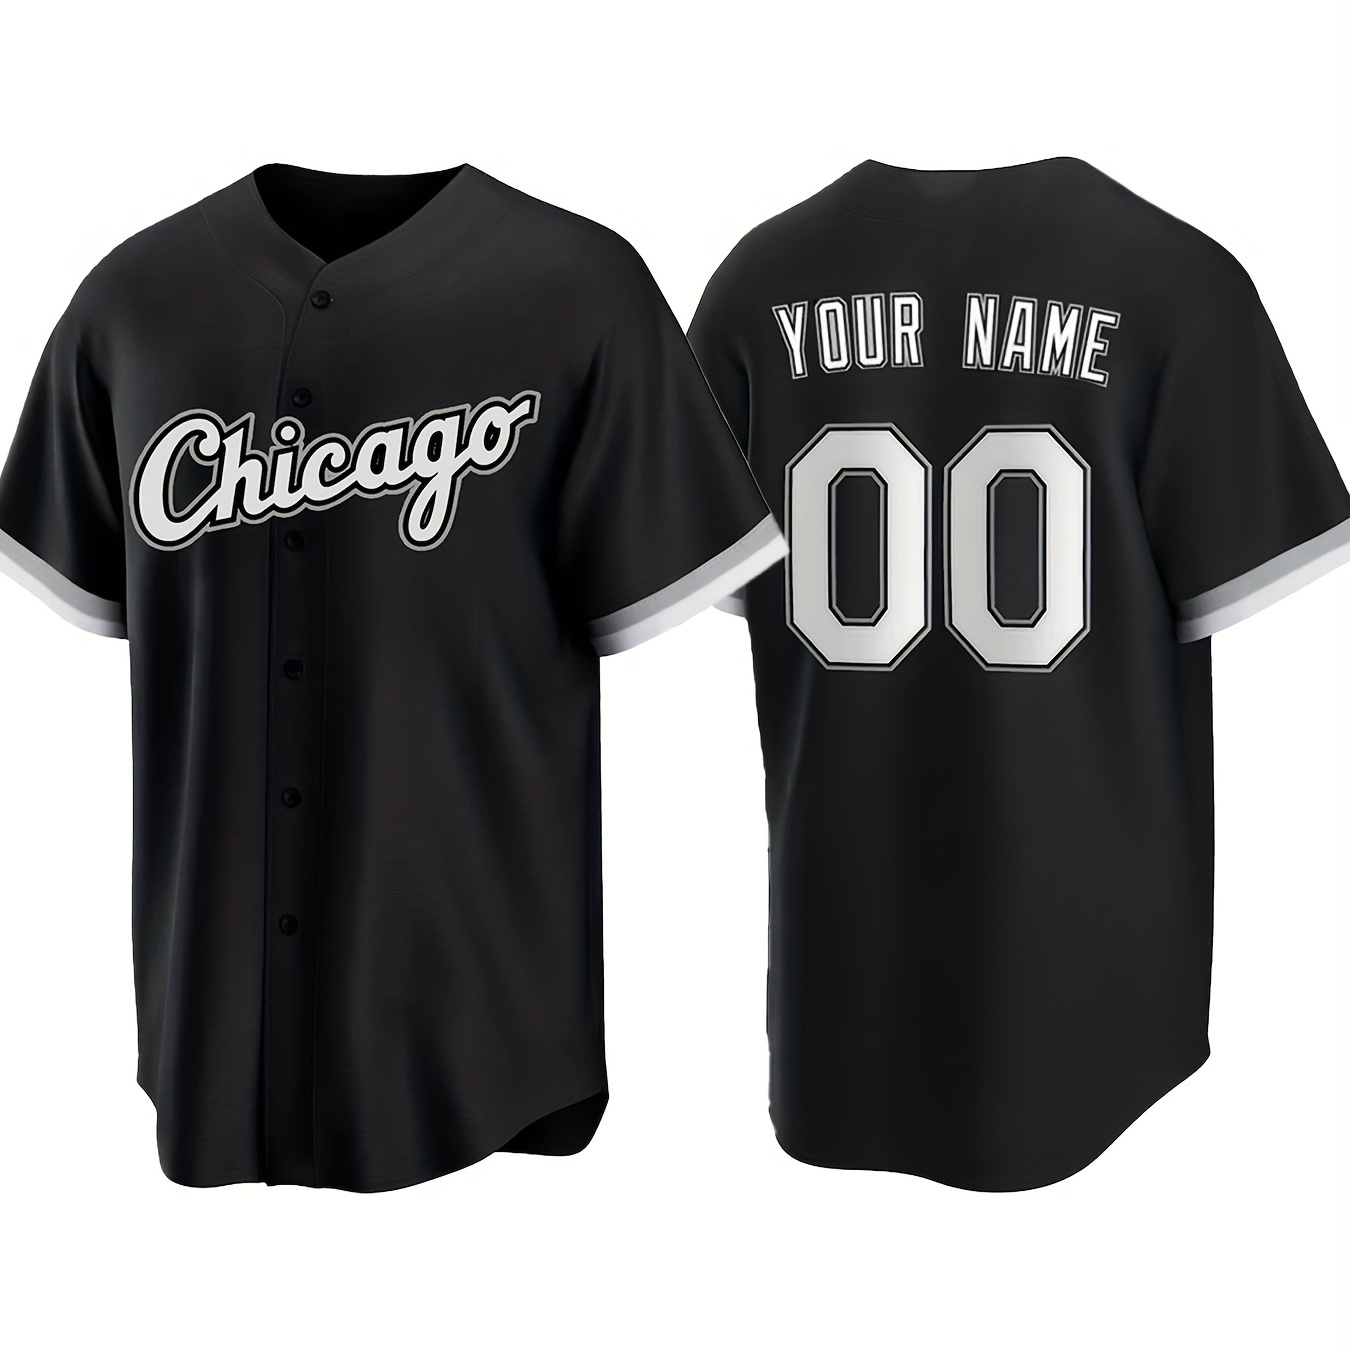 

Customized Name And Number Design, Men's Chicago Embroidery Design Short Sleeve Loose Breathable V-neck Baseball Jersey, Sports Shirt For Team Training